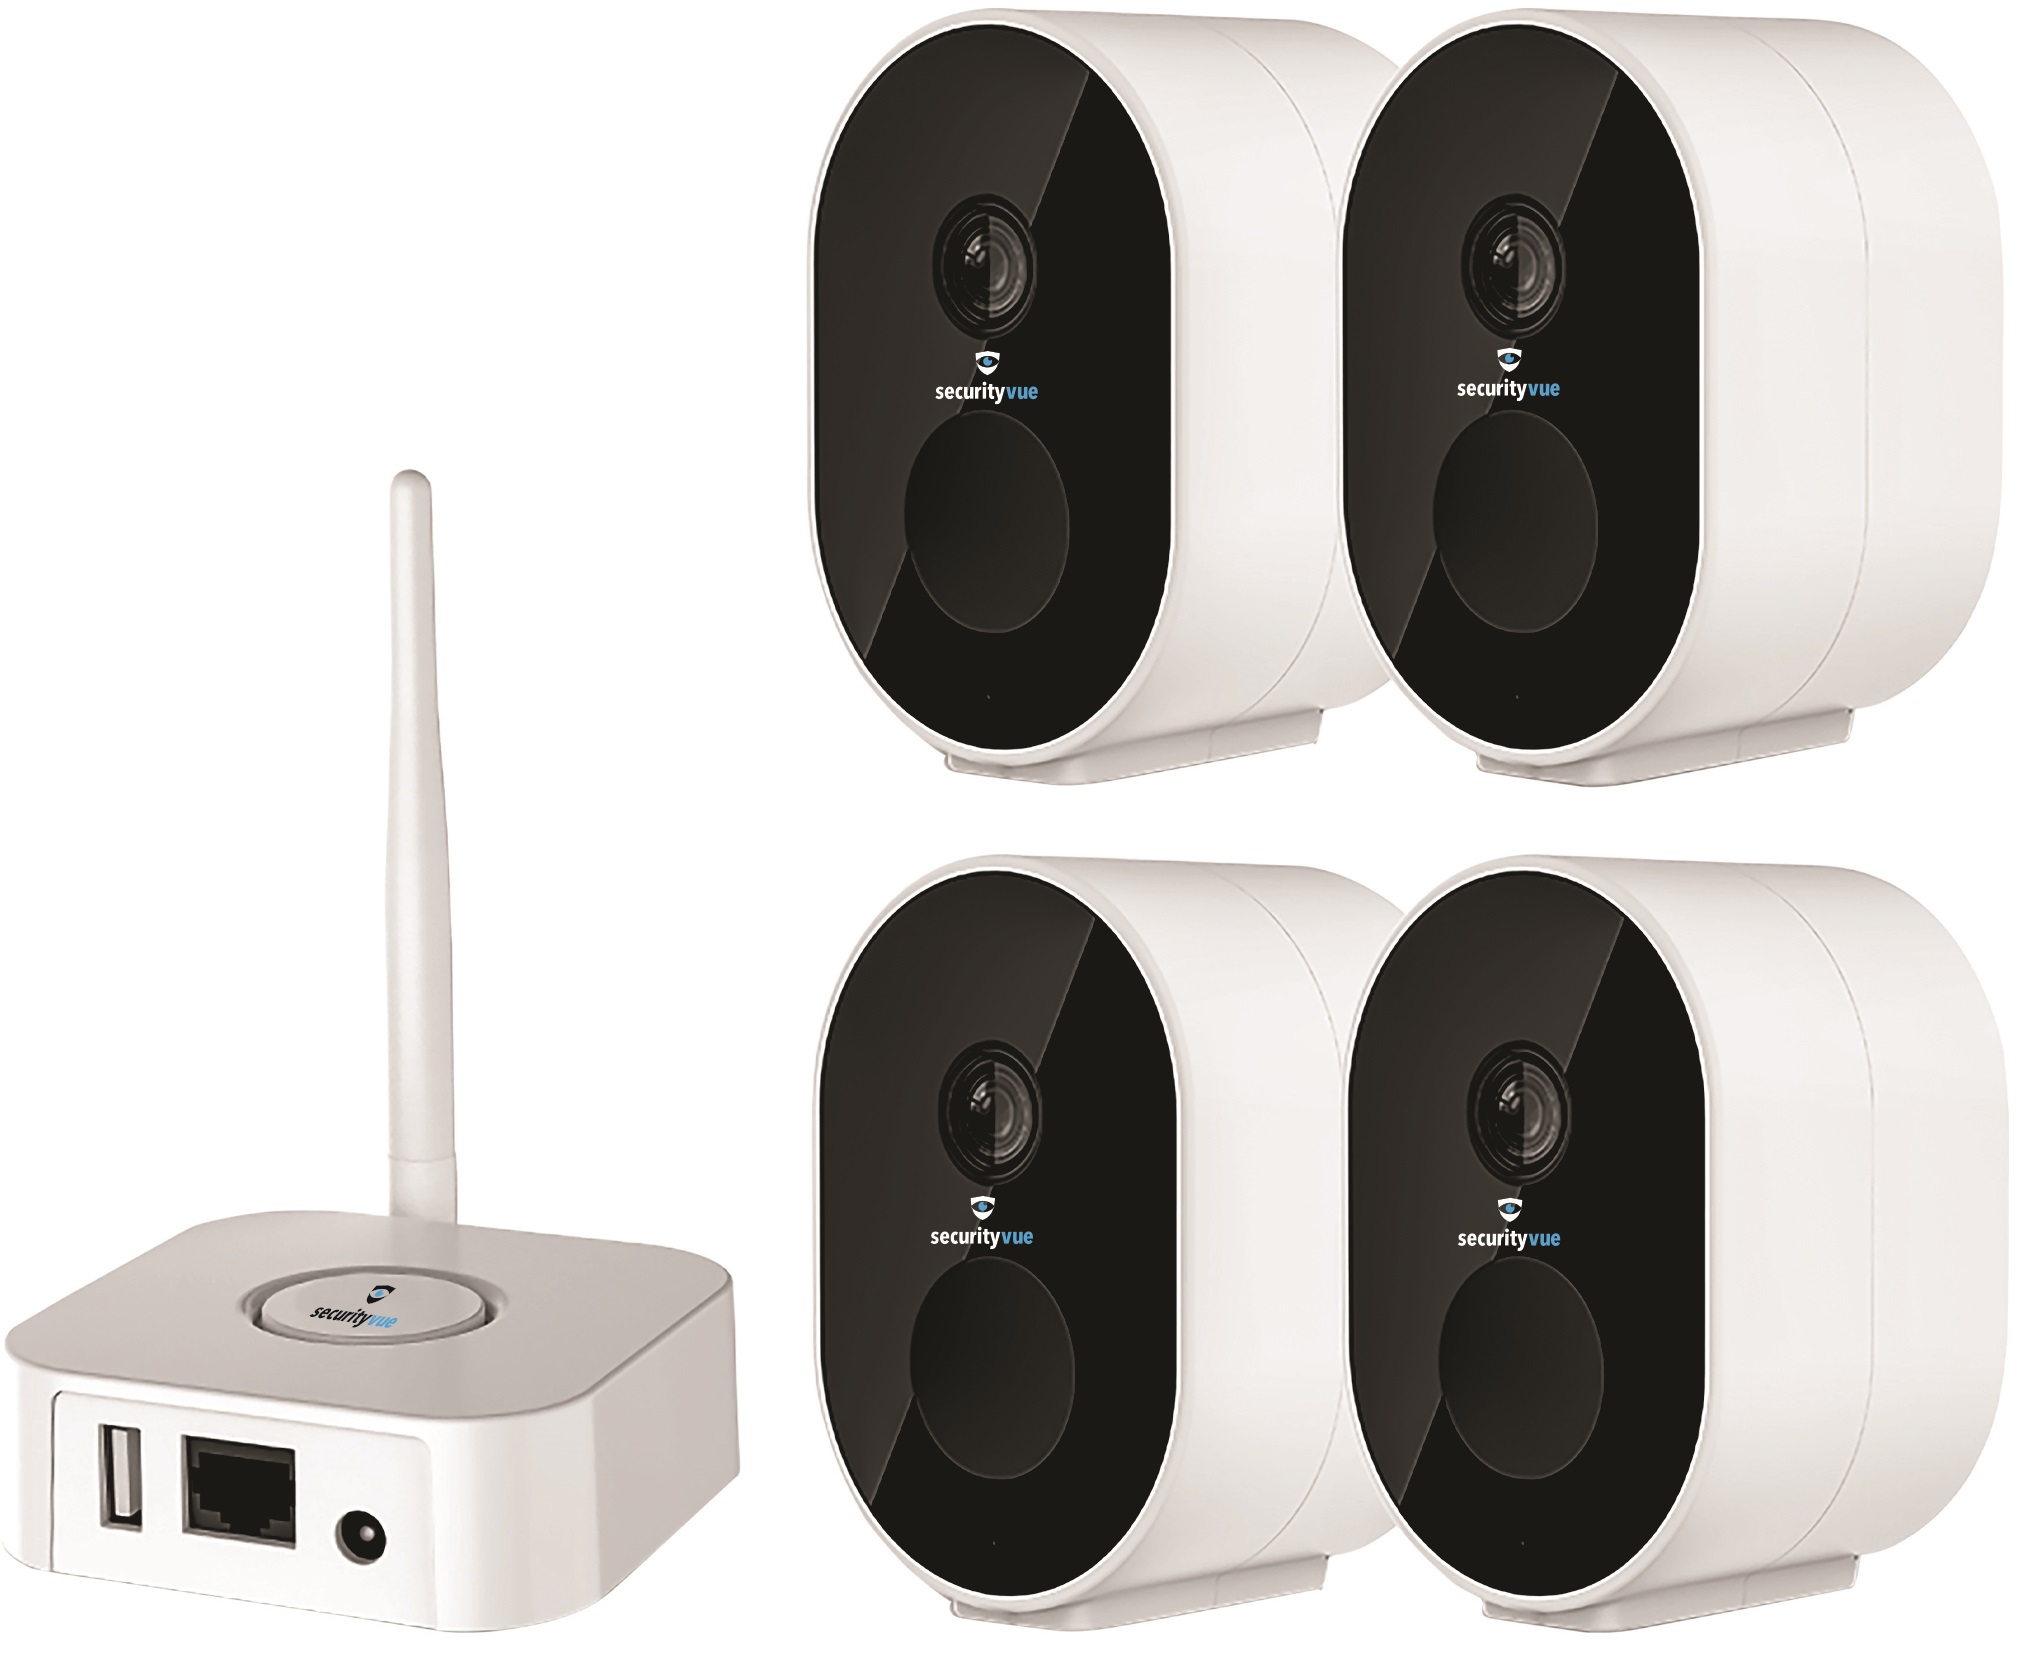 Smart home 1080P HD wireless rechargeable 4 camera NVR kit. Up to 8m PIR detection, 2-way audio communication, IP66 weather proof rated. Wi-Fi enable, 1/2.9" colour cmos sensor.